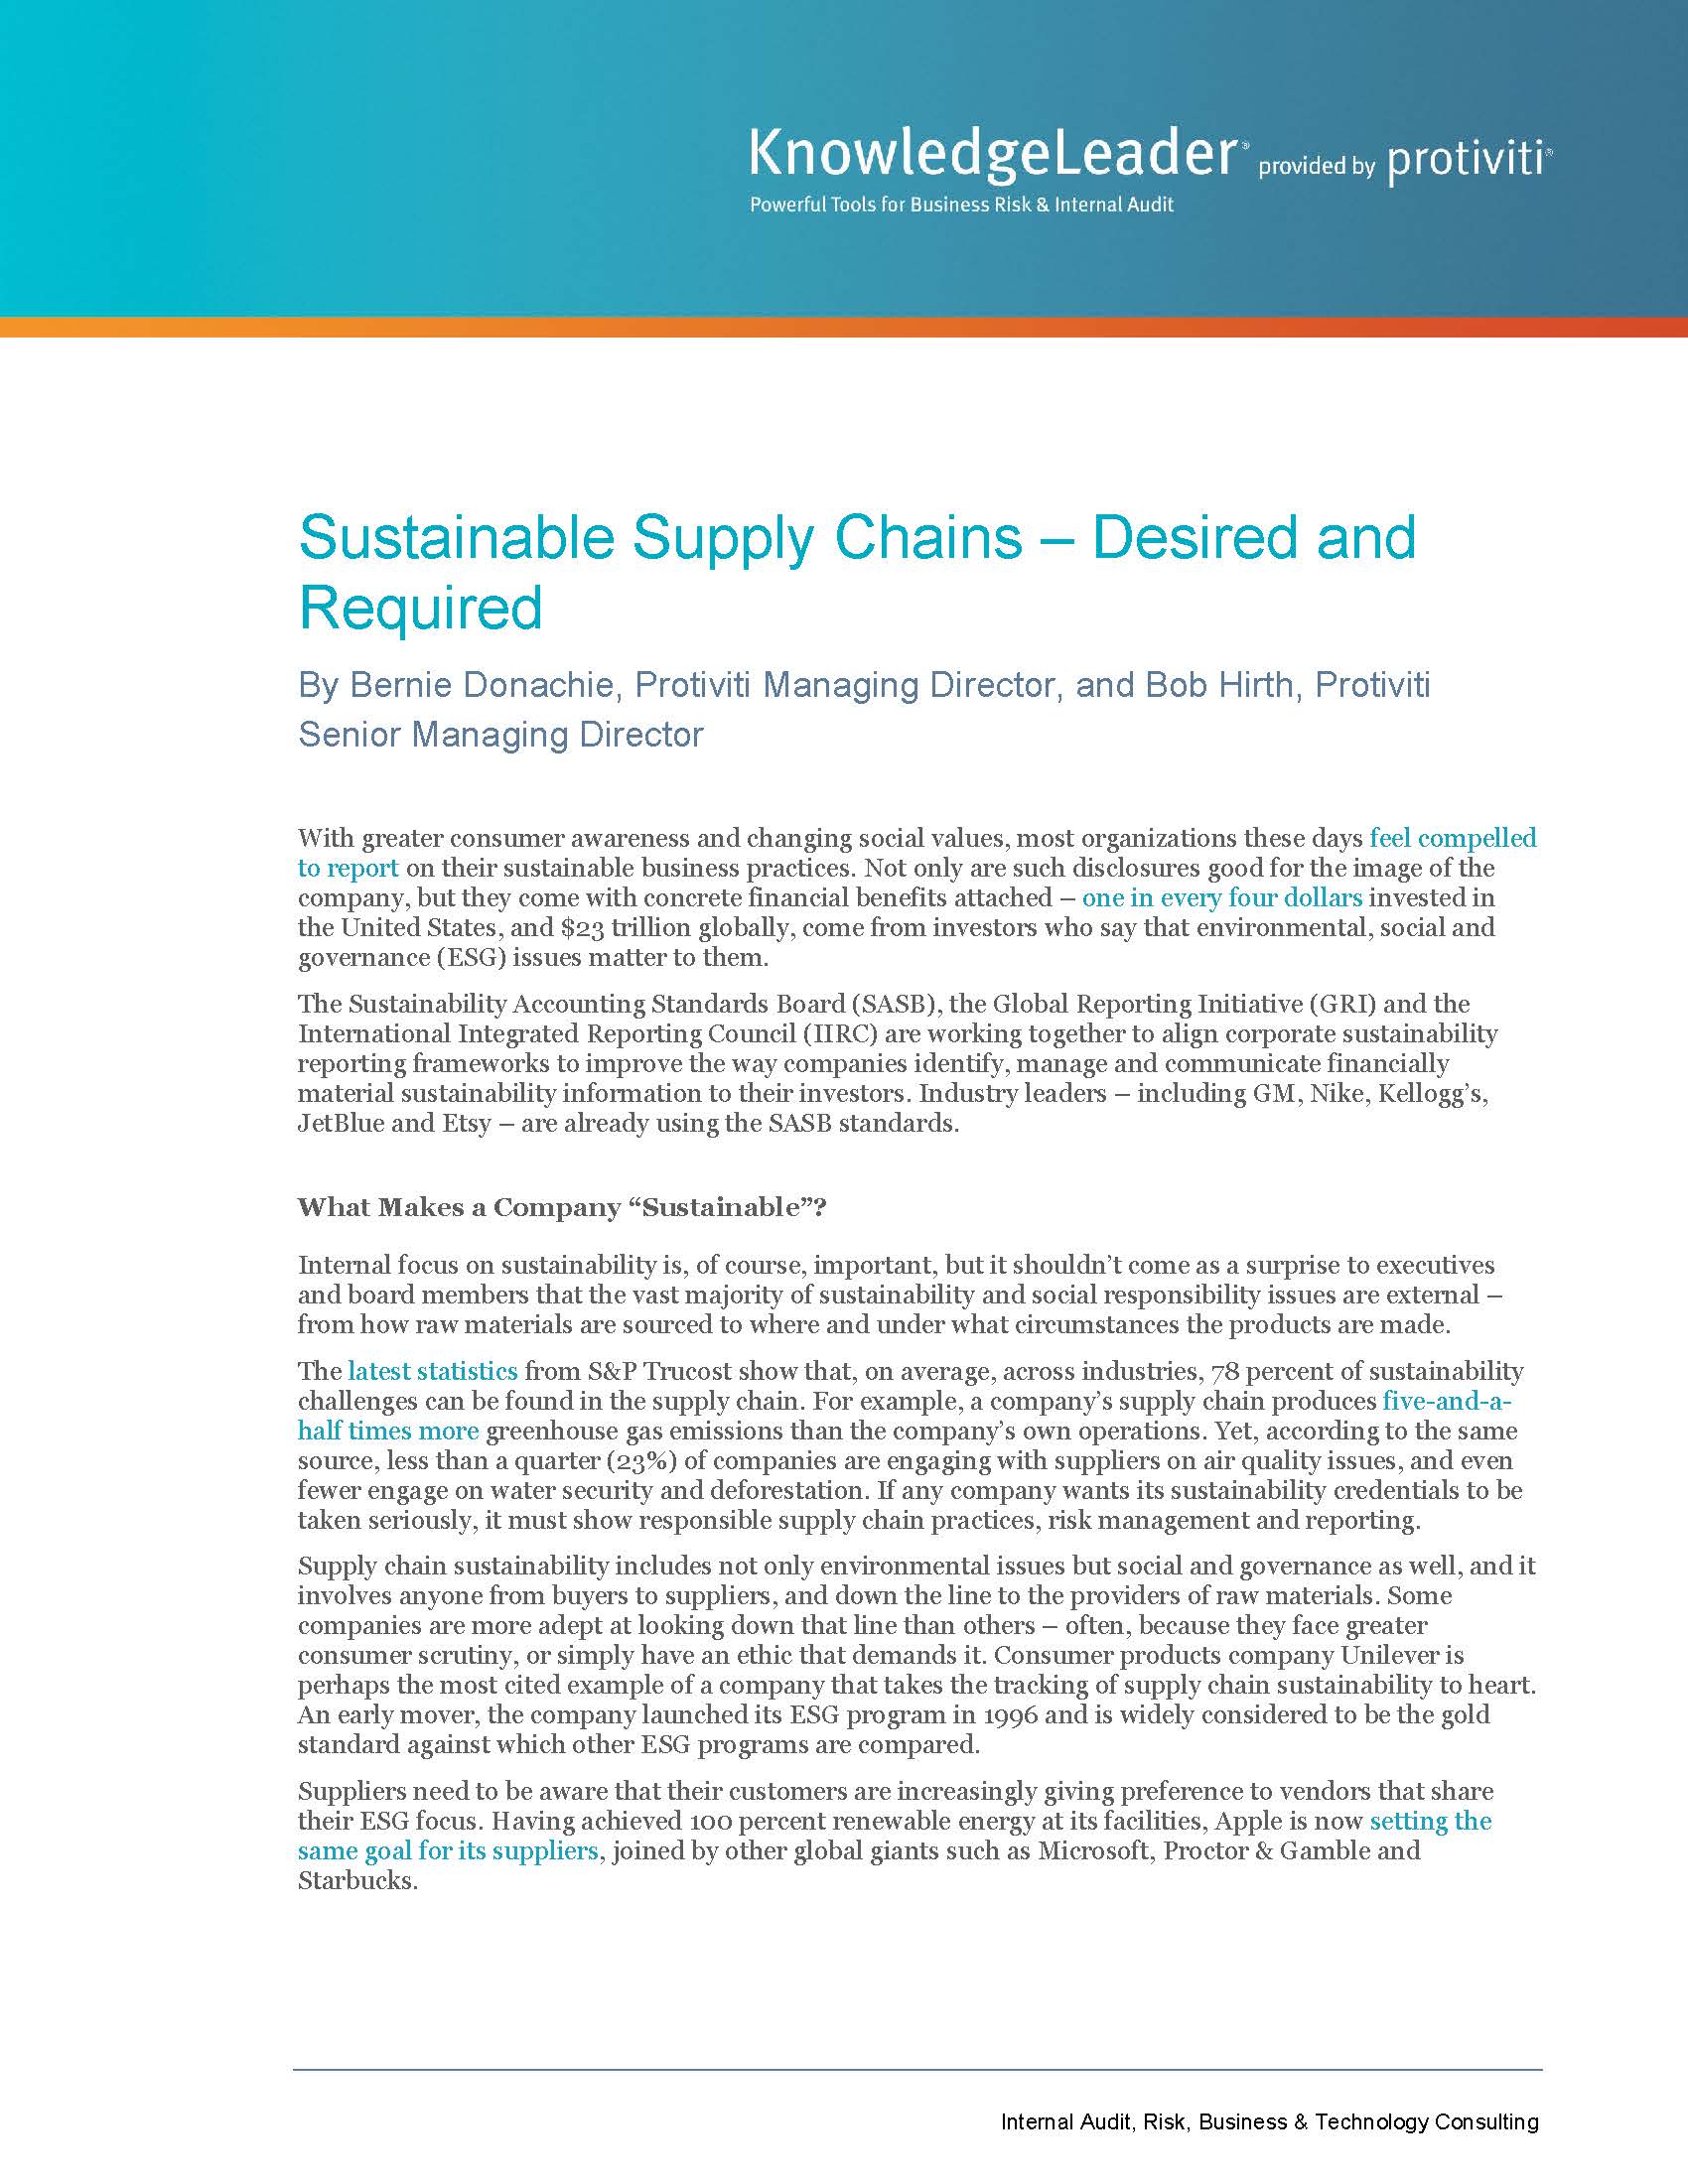 Screenshot of the first page of Sustainable Supply Chains — Desired and Required